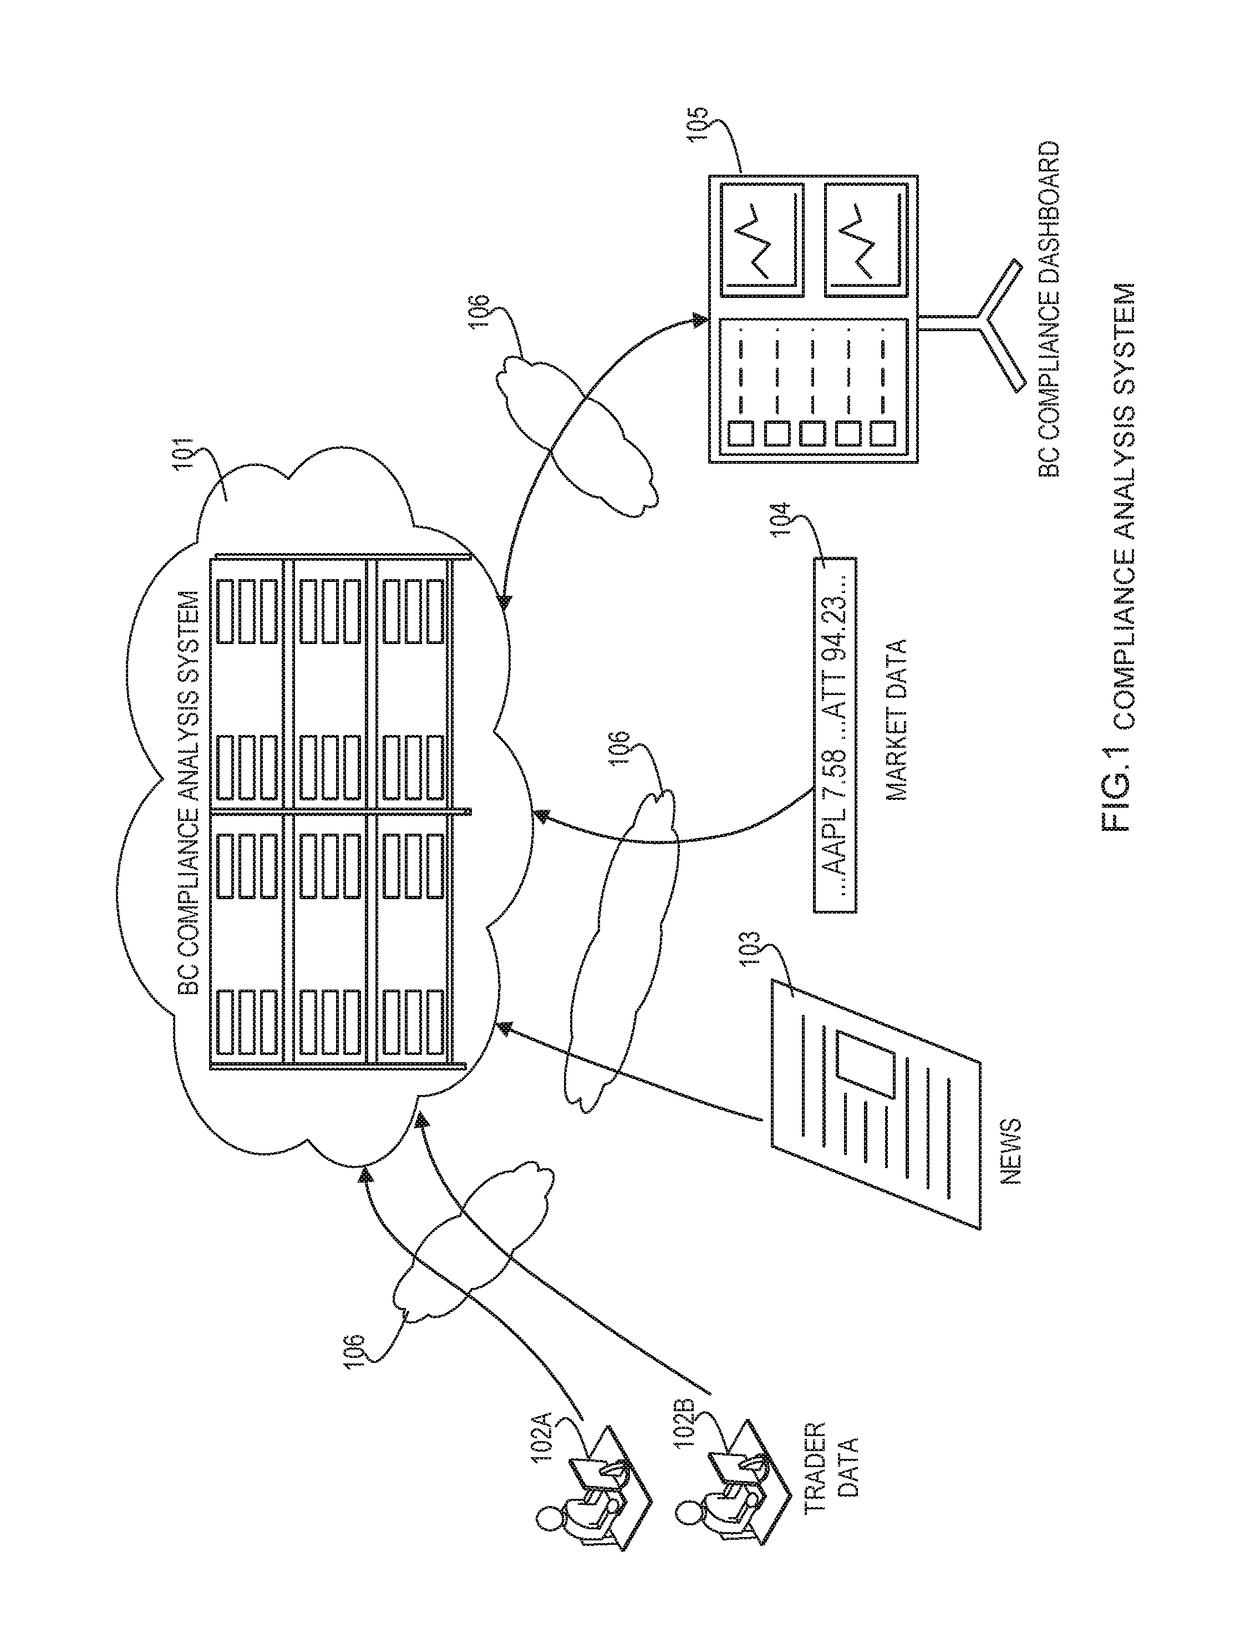 Systems and methods for identification and analysis of securities transactions abnormalities